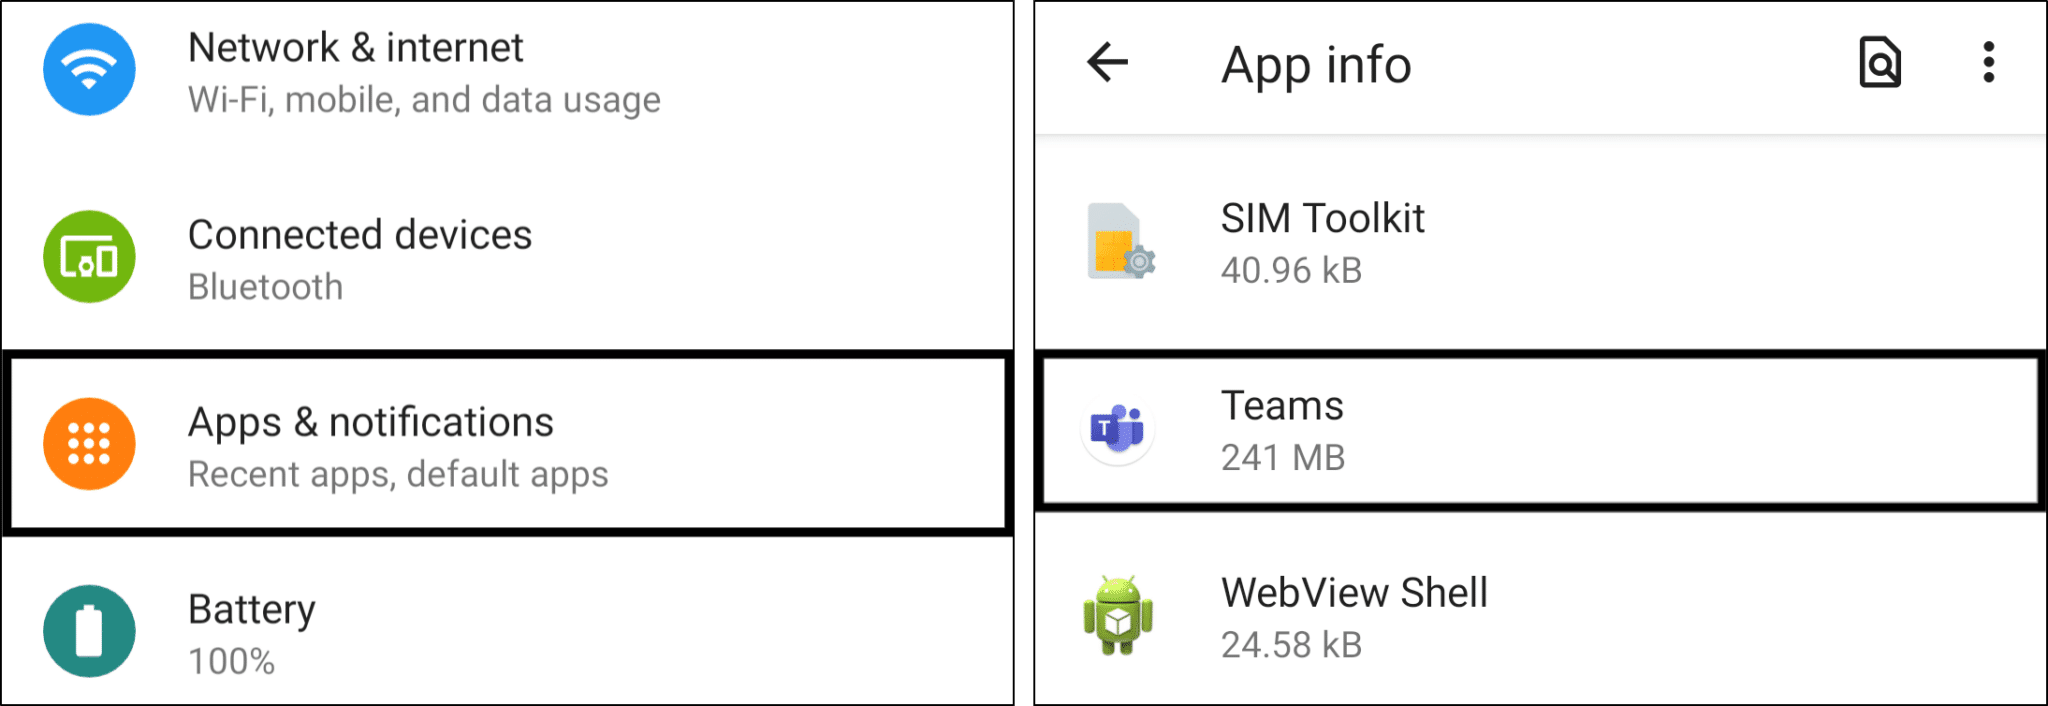 access Microsoft Teams app settings in system settings on Android to enable system notification settings to fix mobile notifications not working or showing on Android